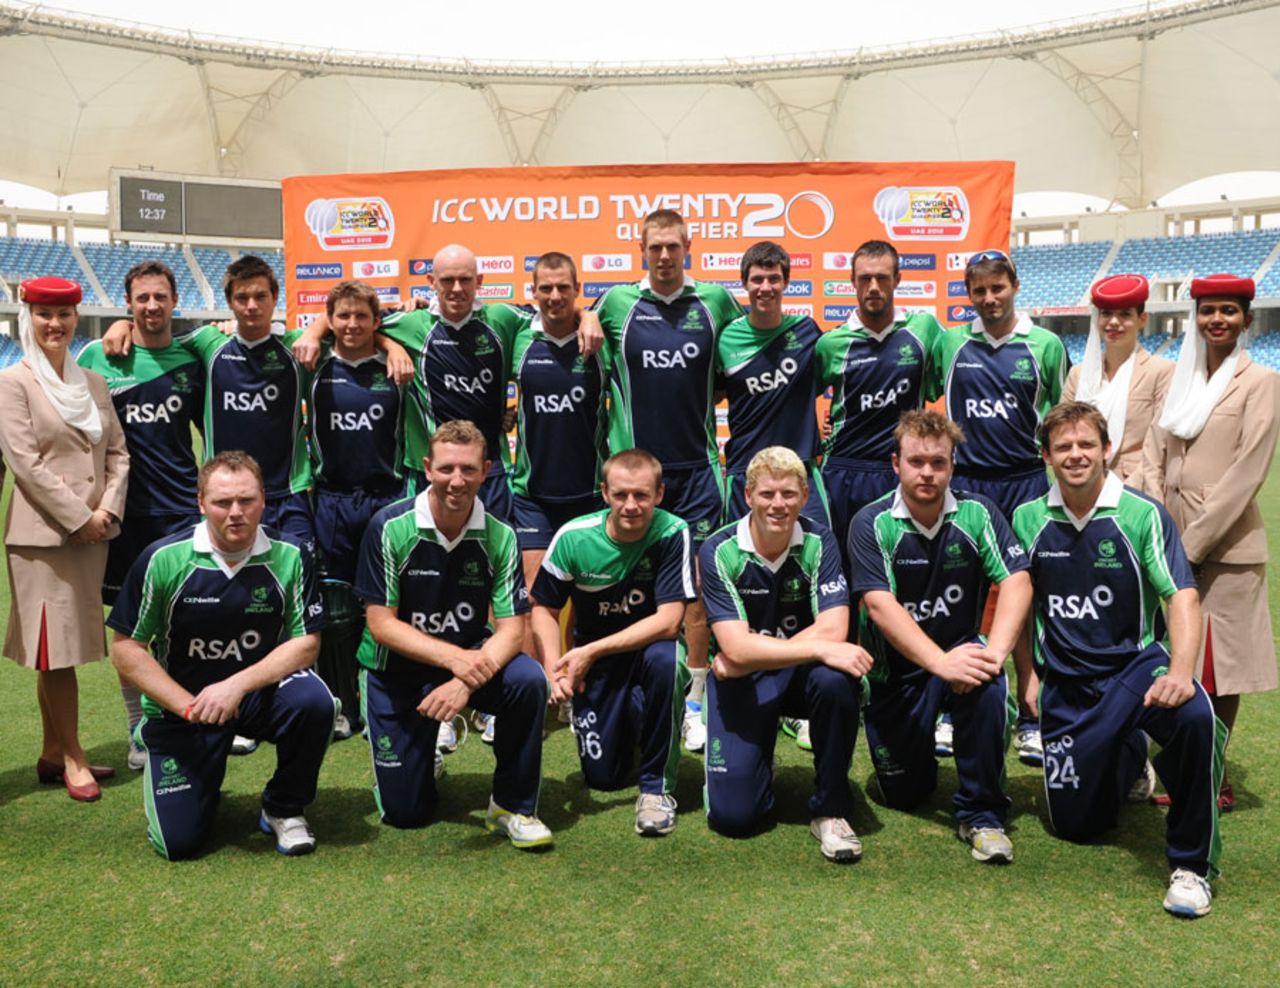 The Ireland team after beating Namibia to make the World Twenty20, Ireland v Namibia, ICC World Twenty20 Qualifier, preliminary final, Dubai, March 24, 2012